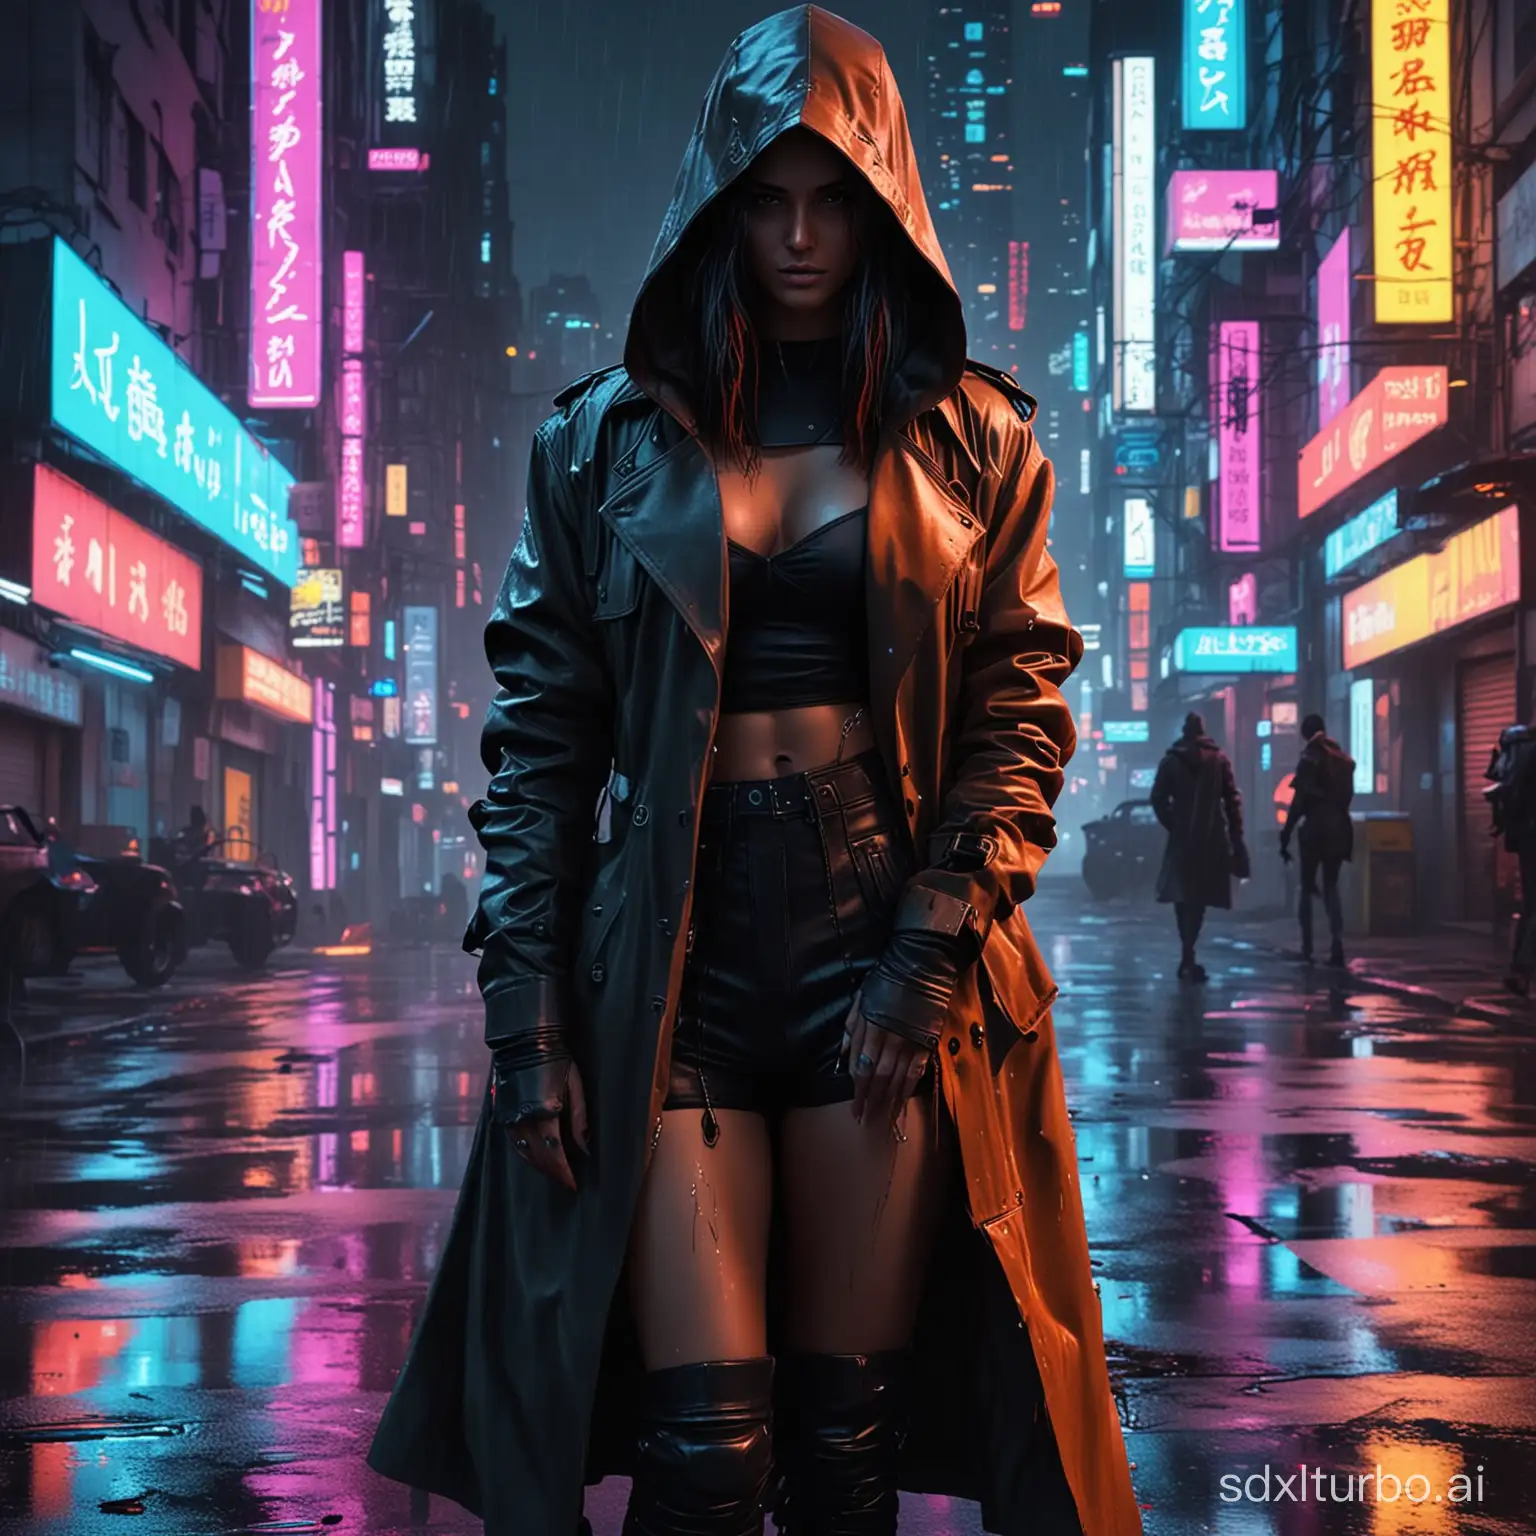 photorealistic cyberpunk city at night, bright neon lights, trash littering the streets, shadowed muscley female character silhouette with long trench coat and hood standing in the middle of a wet street, intense vivid colors